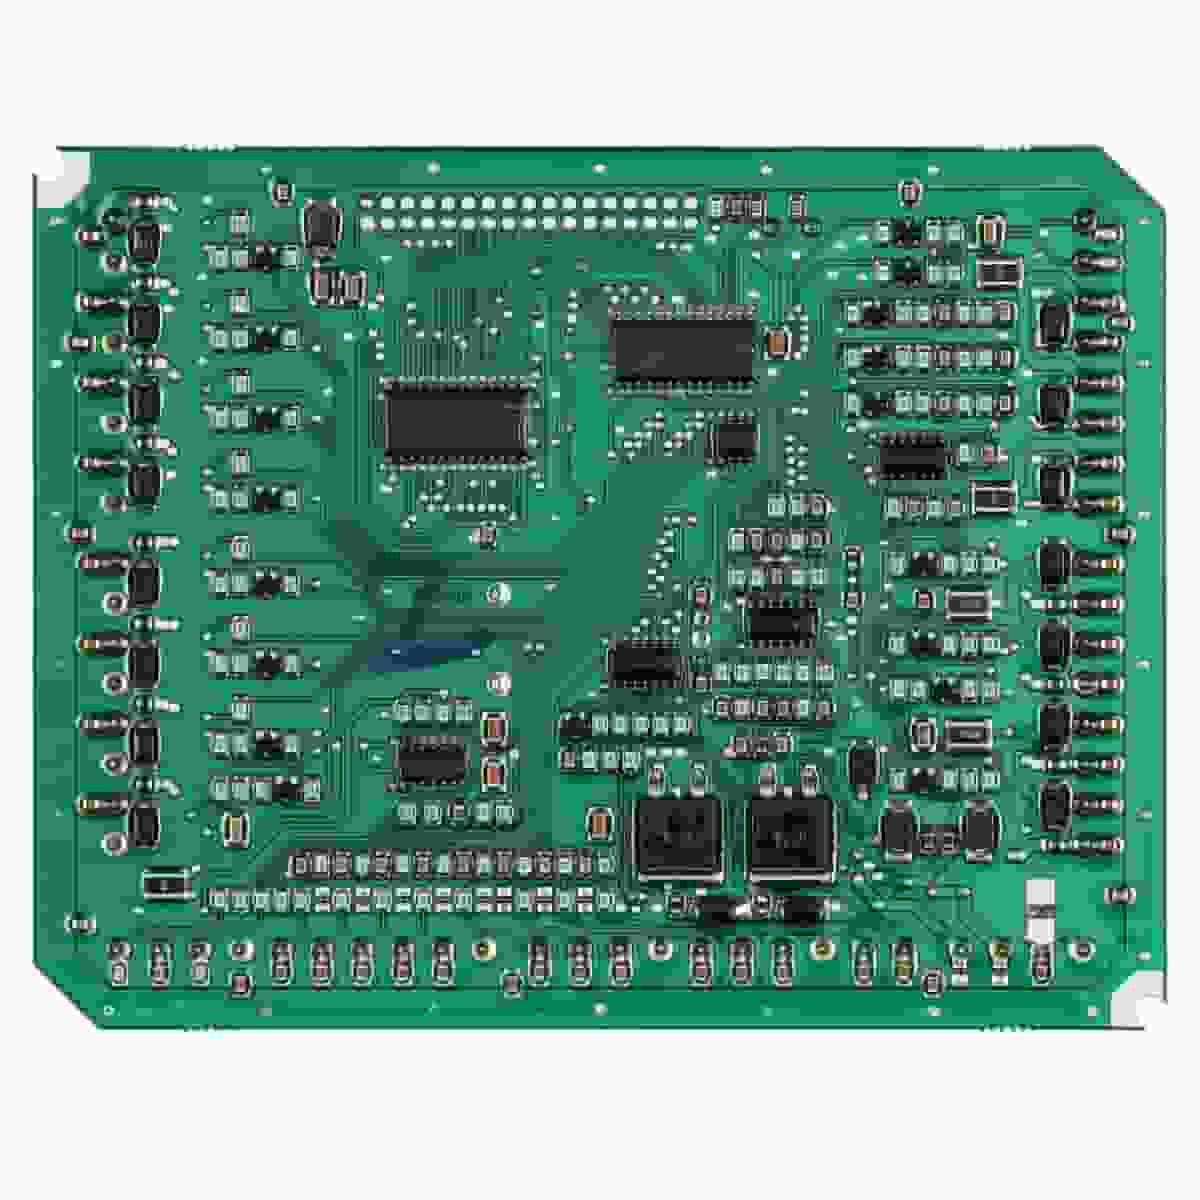 Top-quality PCB manufacturing services in Shenzhen for your electronic projects